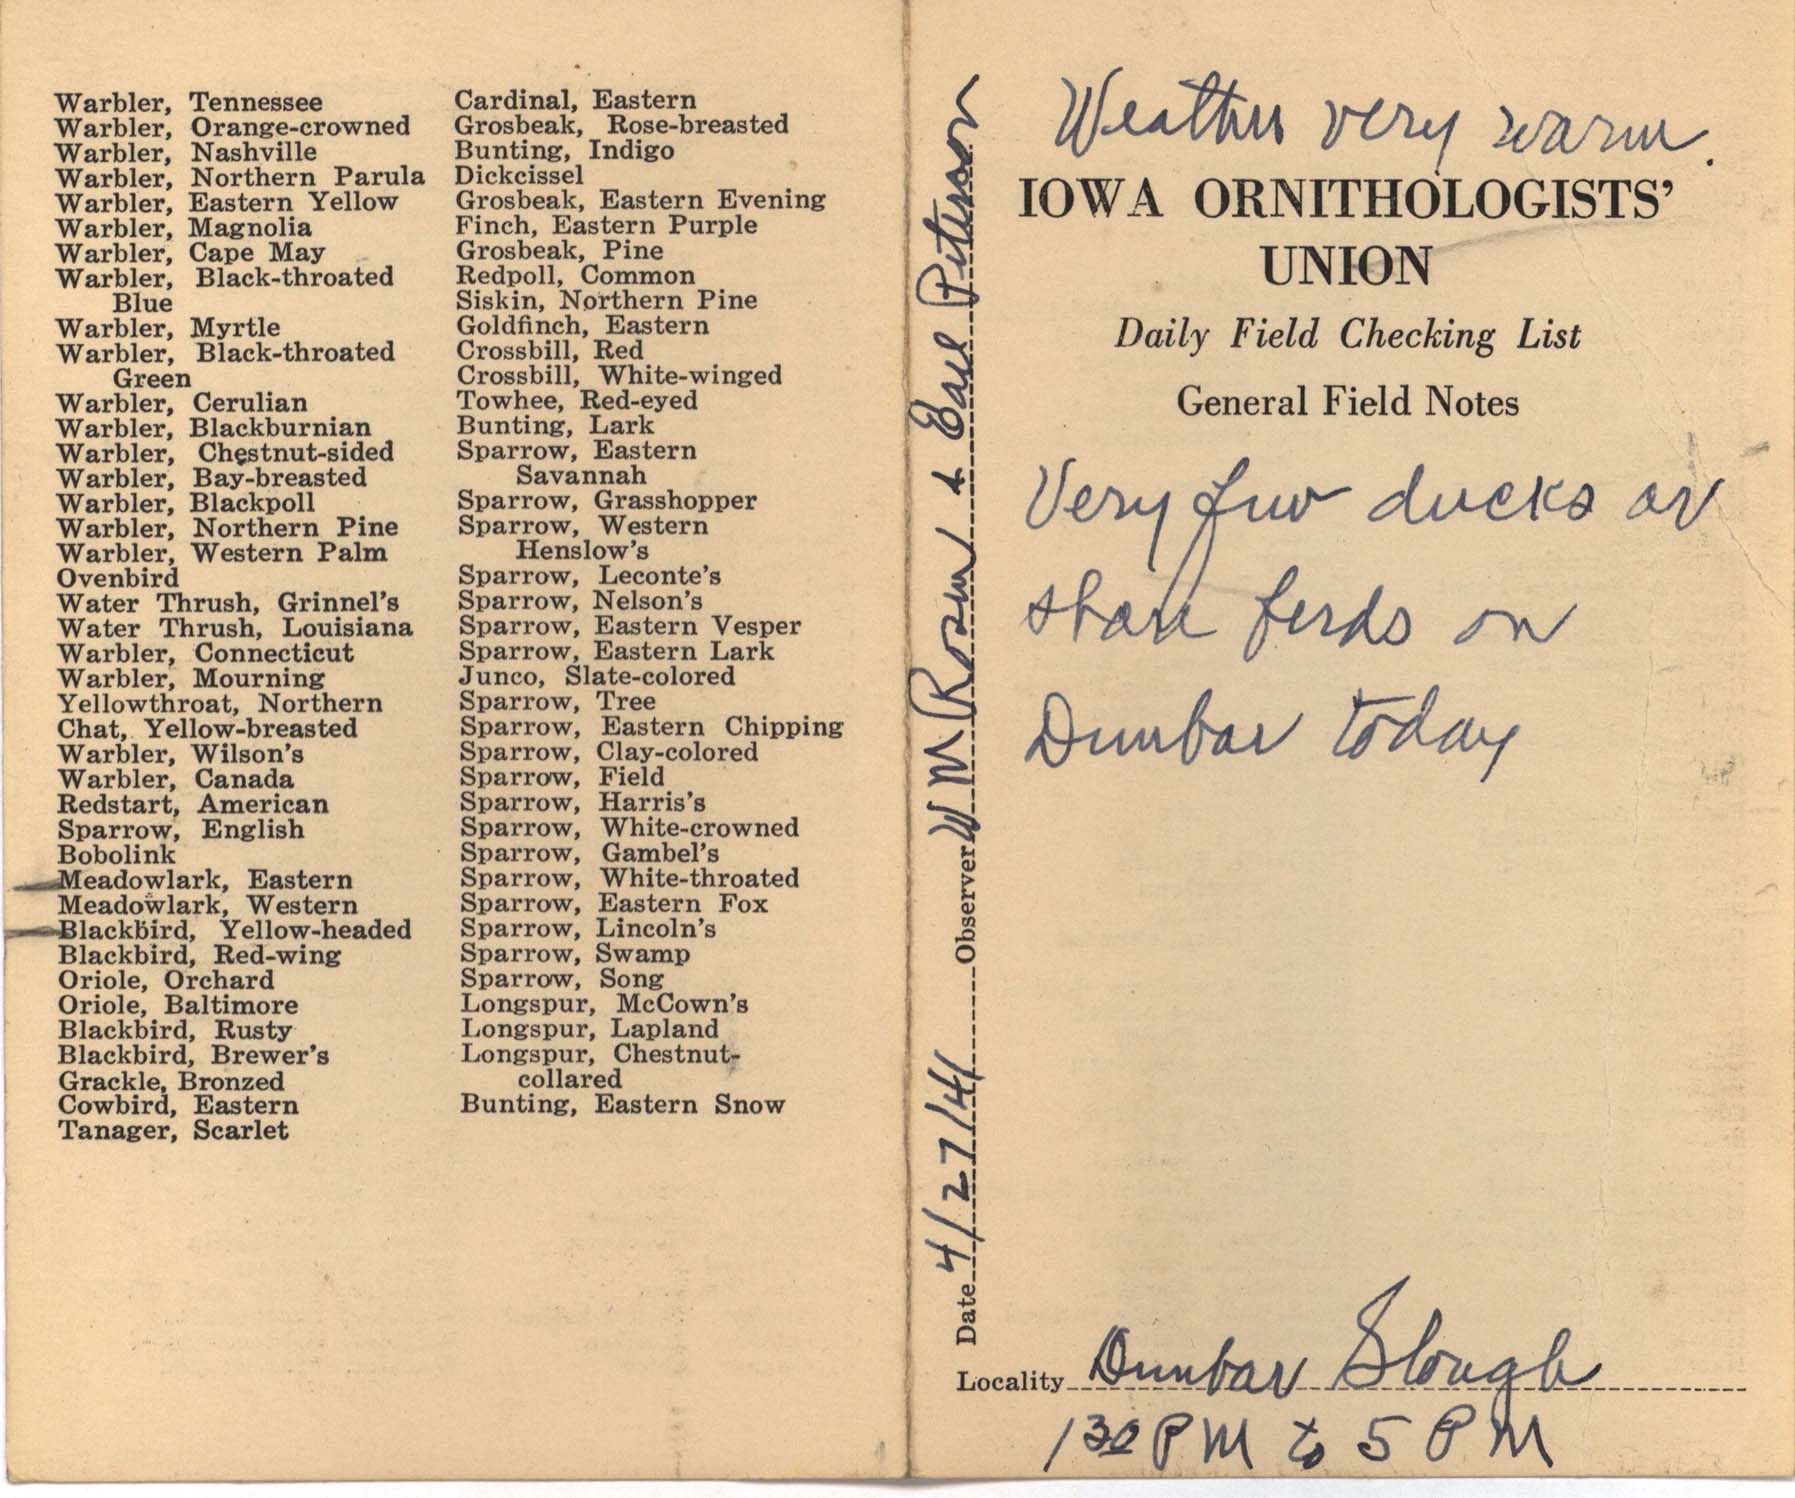 Daily field checking list by Walter Rosene, April 27, 1941